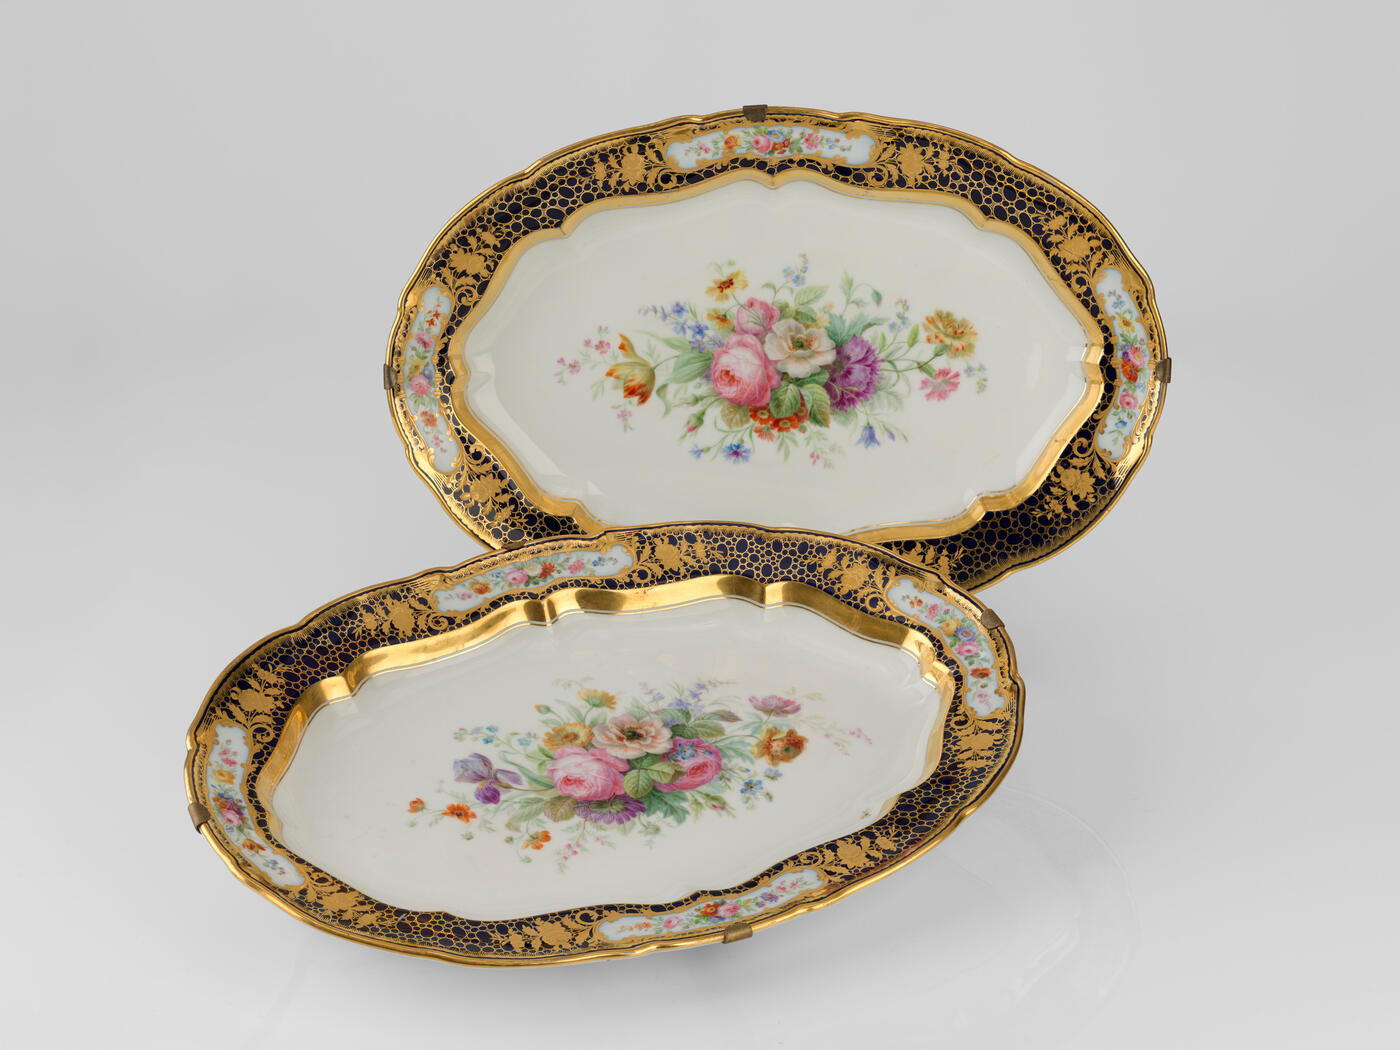 A Pair of Dishes from the Sèvres Service